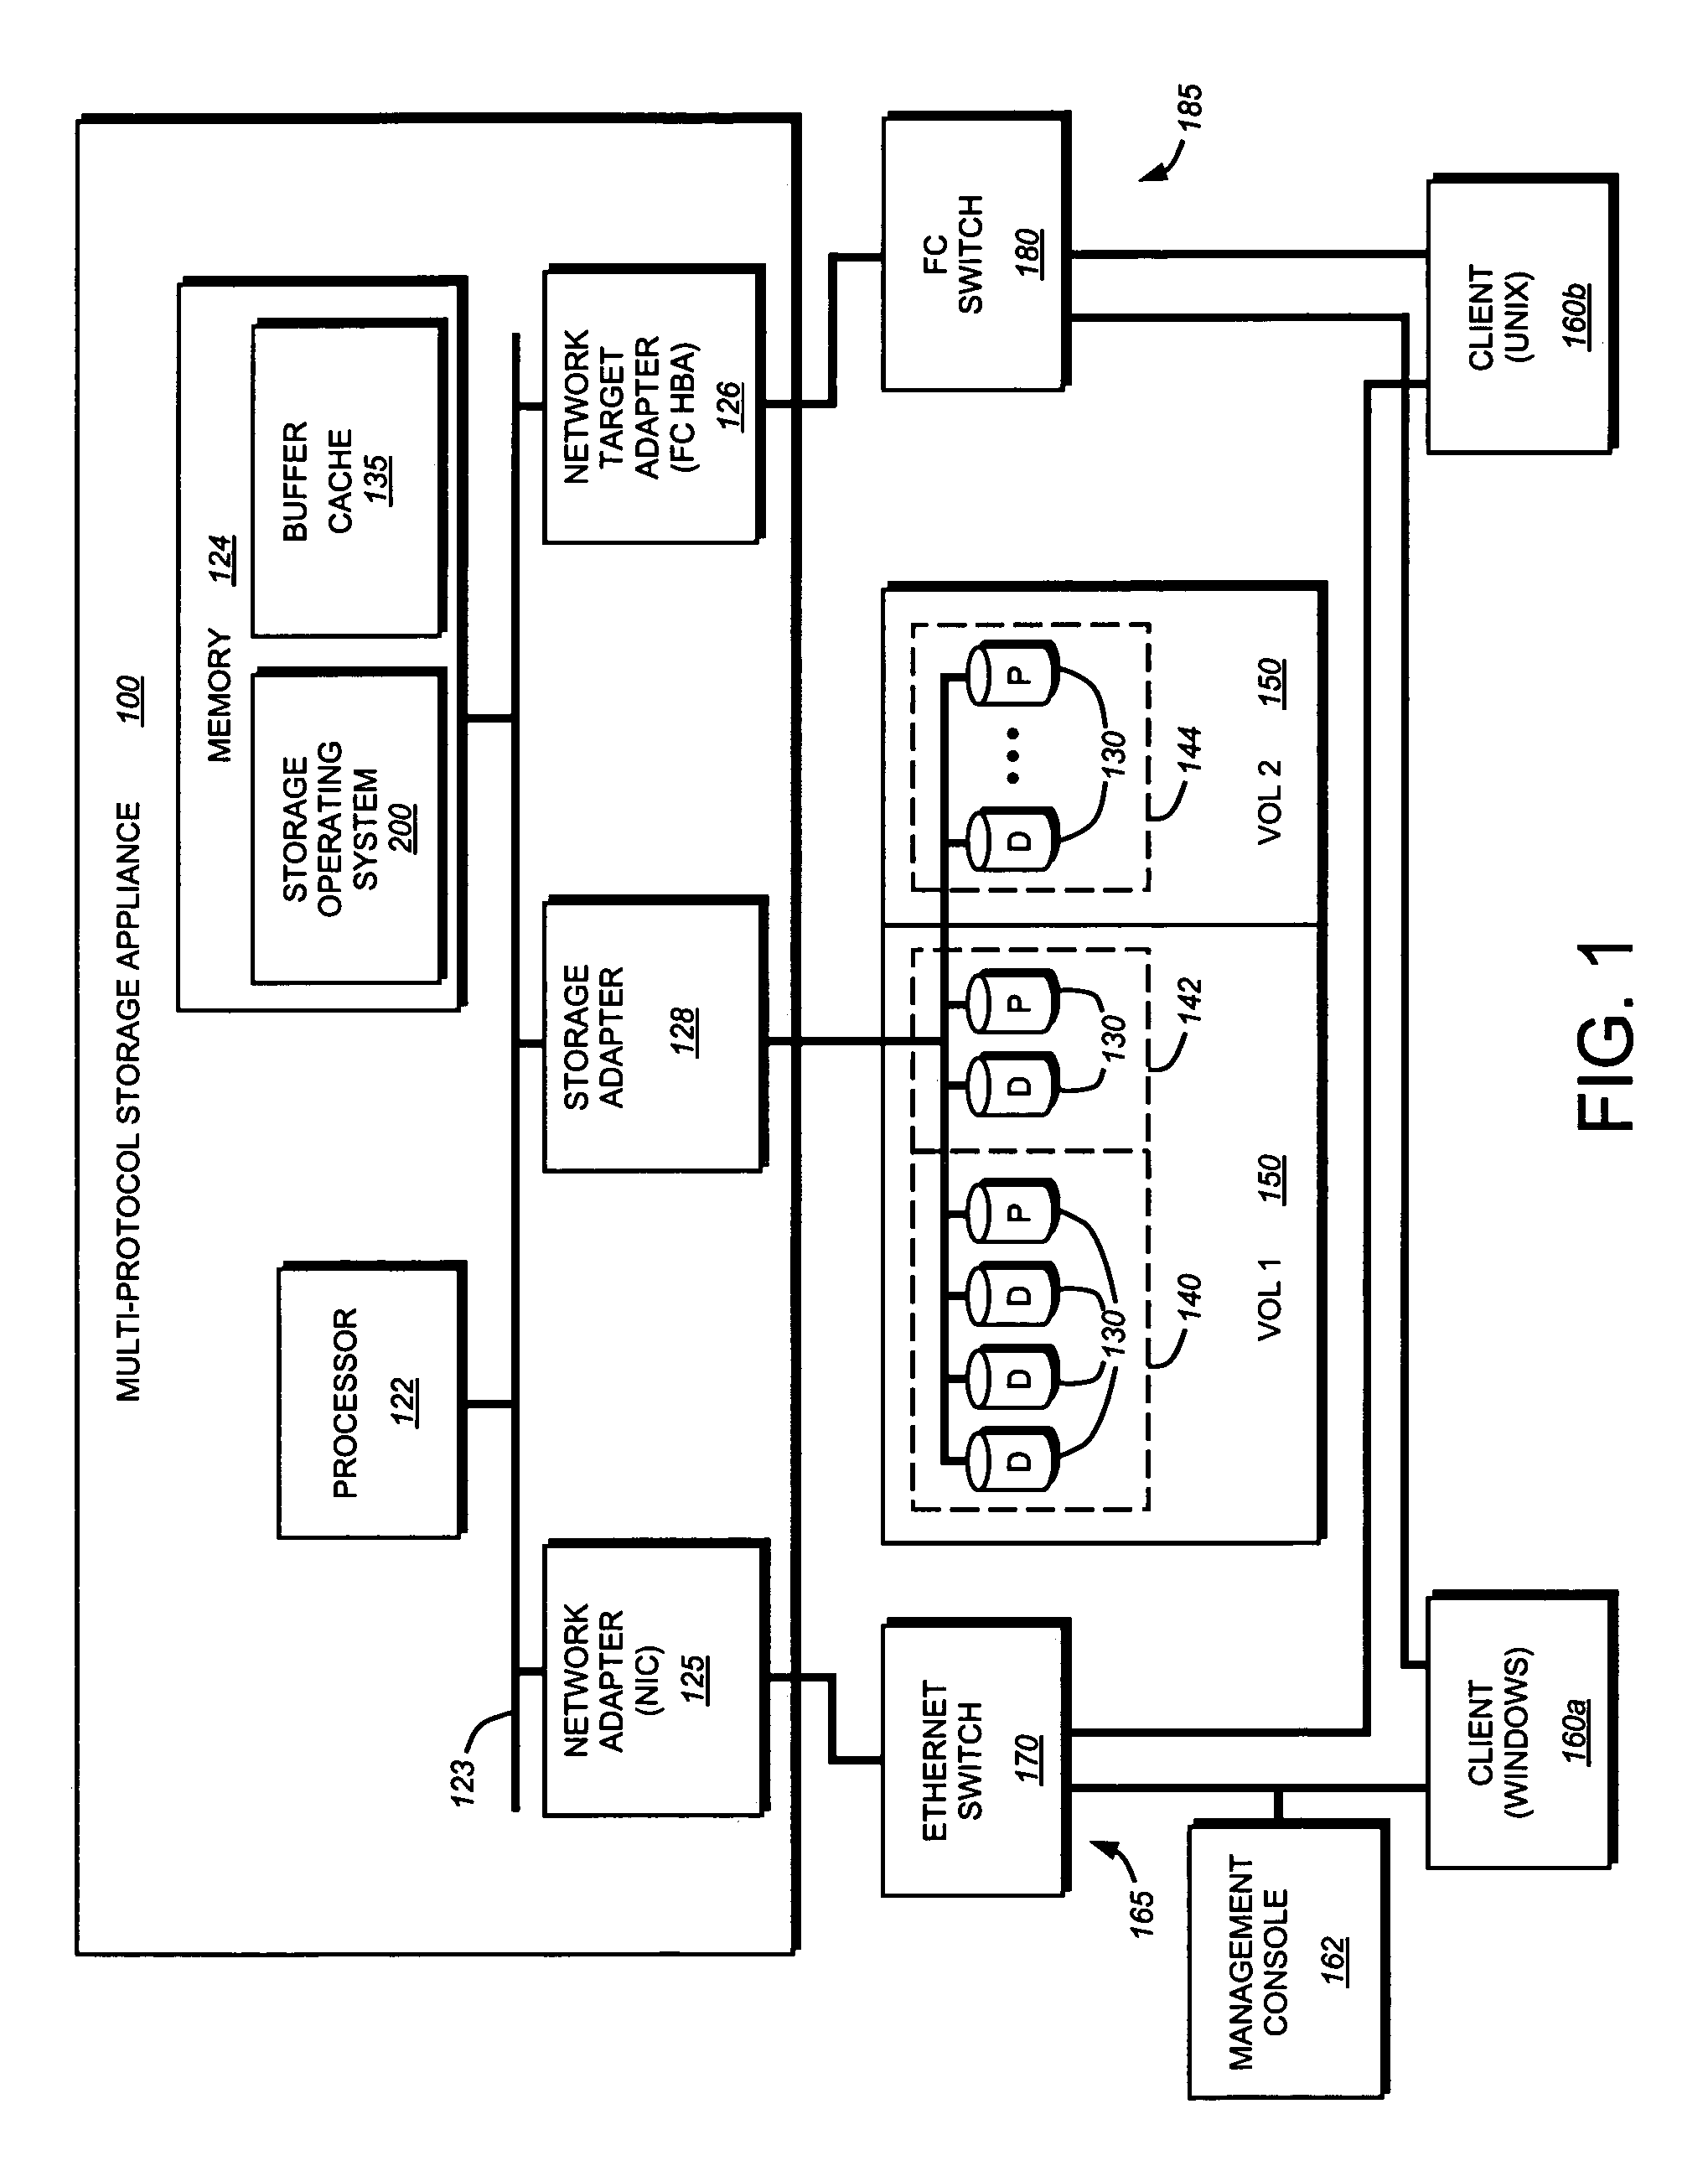 System and method for zero copy block protocol write operations